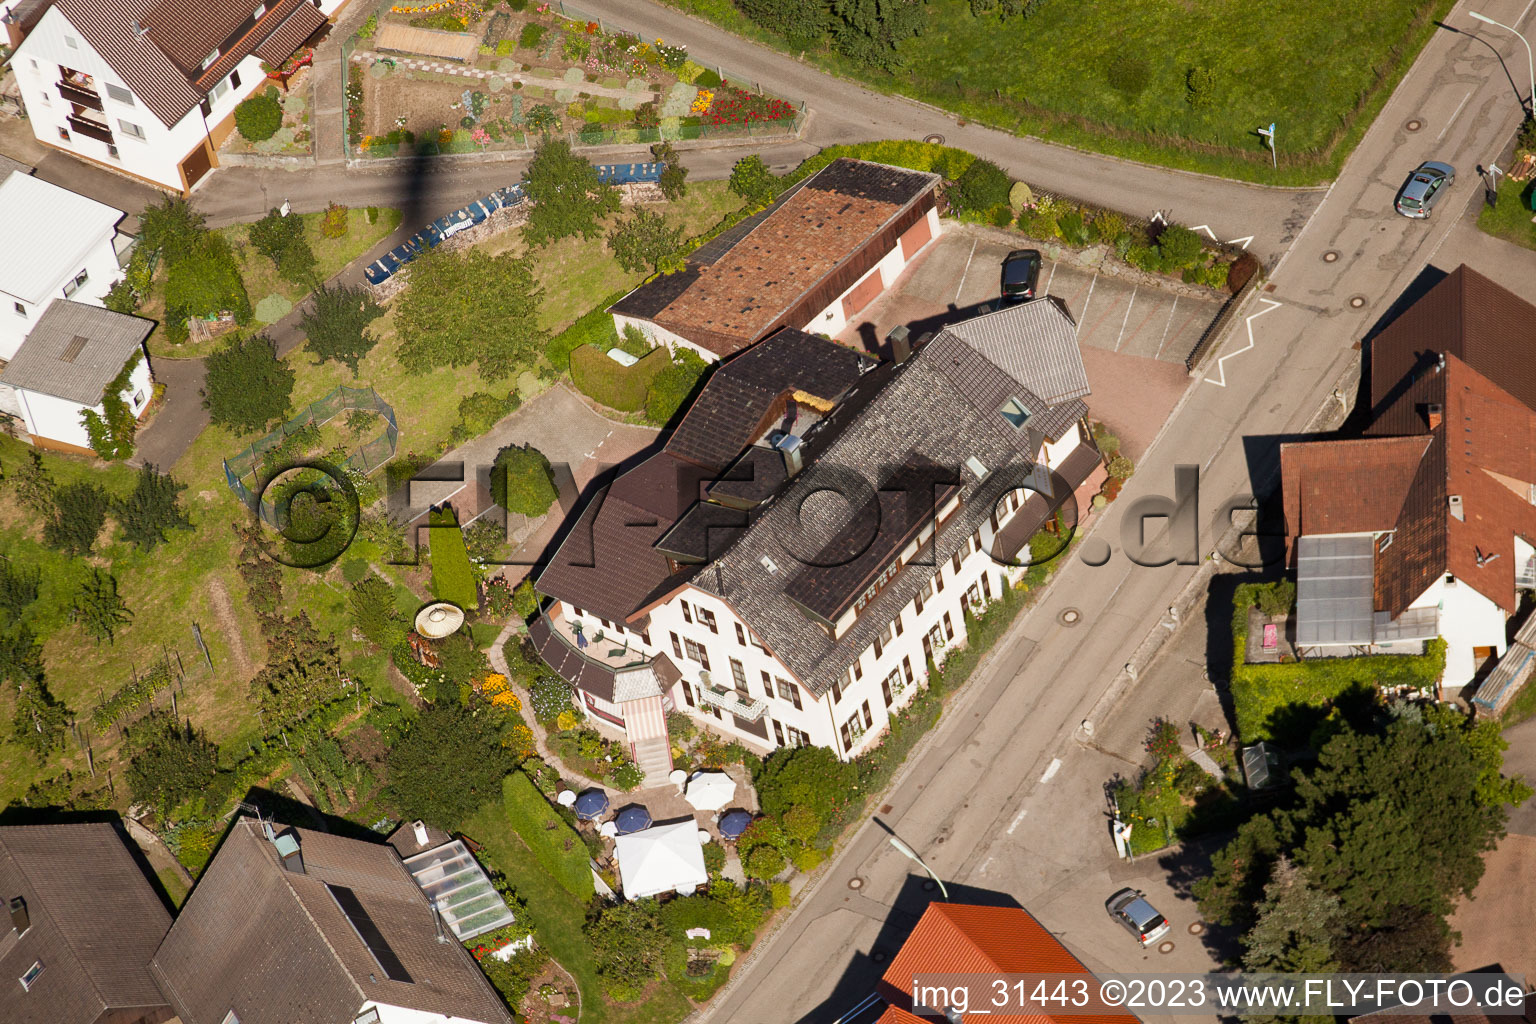 Oblique view of Hotel Restaurant Rebstock in the district Riegel in Bühl in the state Baden-Wuerttemberg, Germany